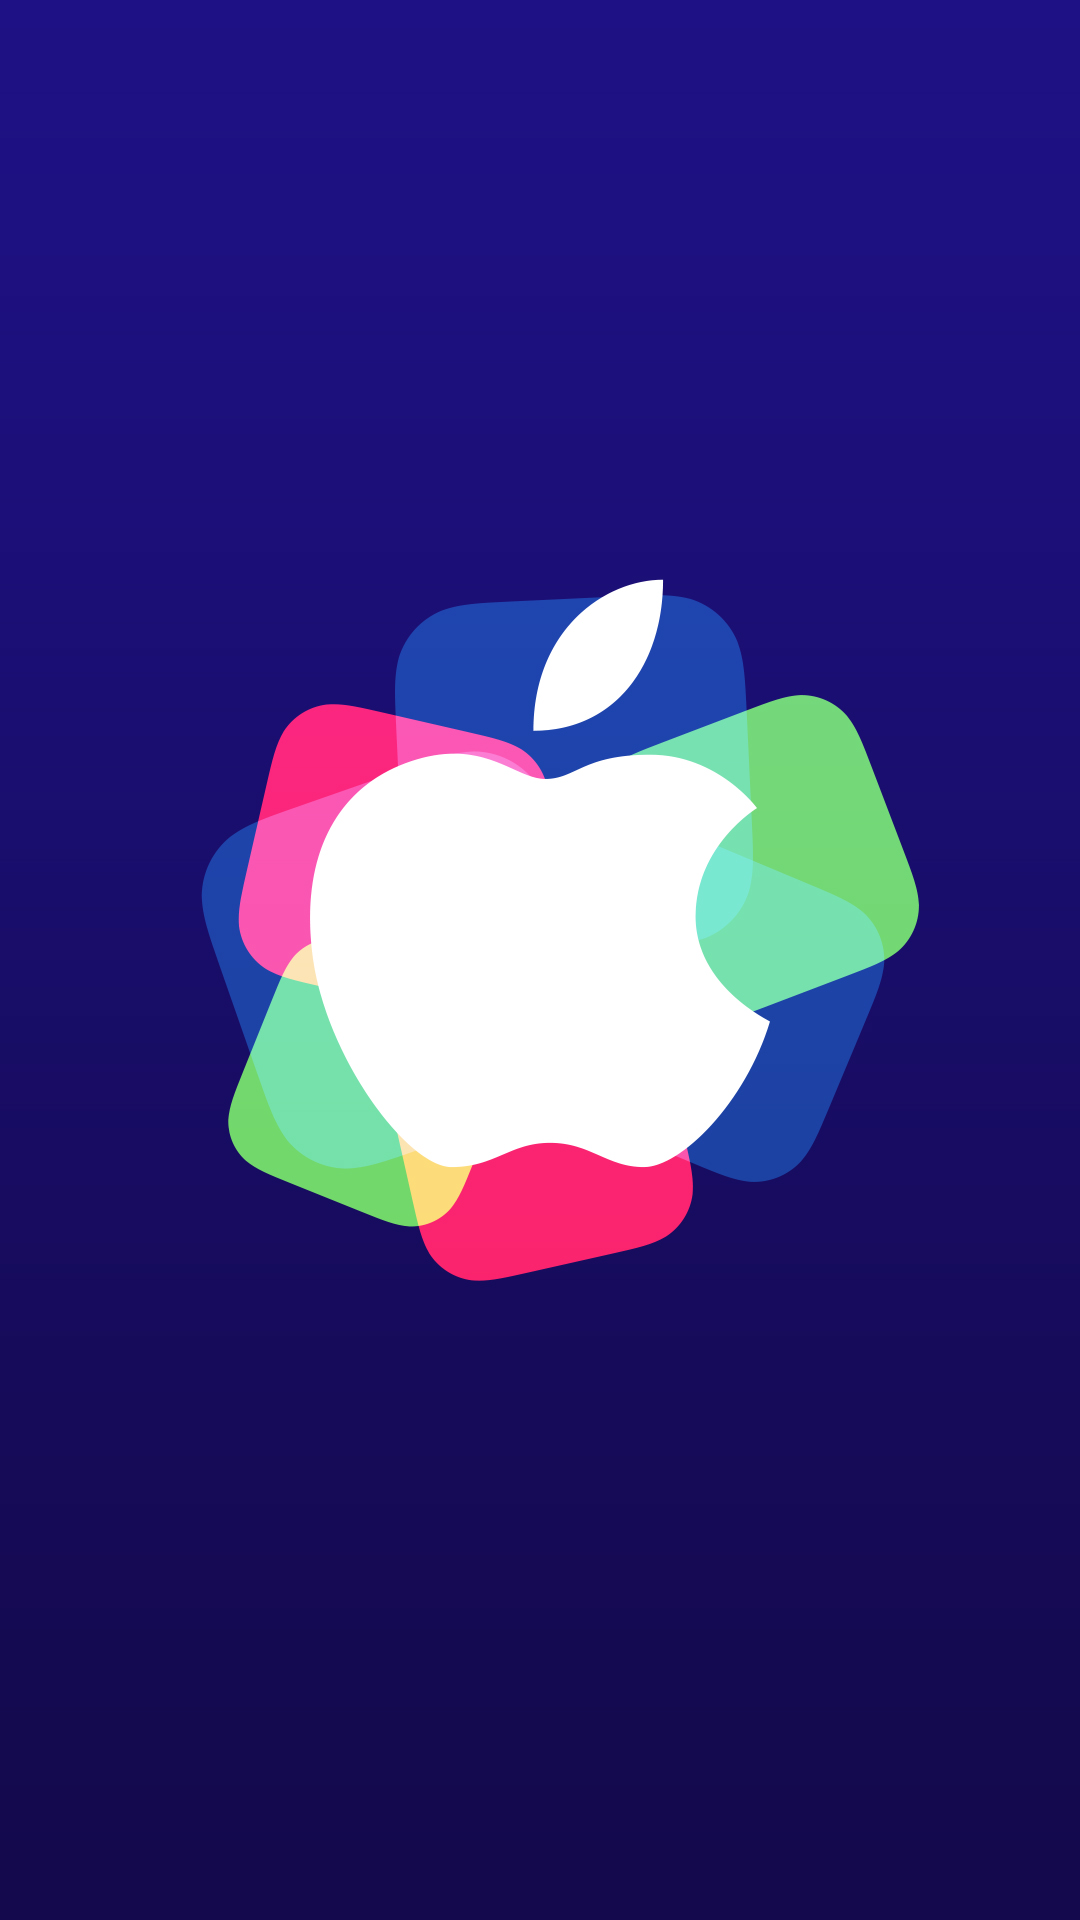 Colorful Apple iPhone Wallpaper HD